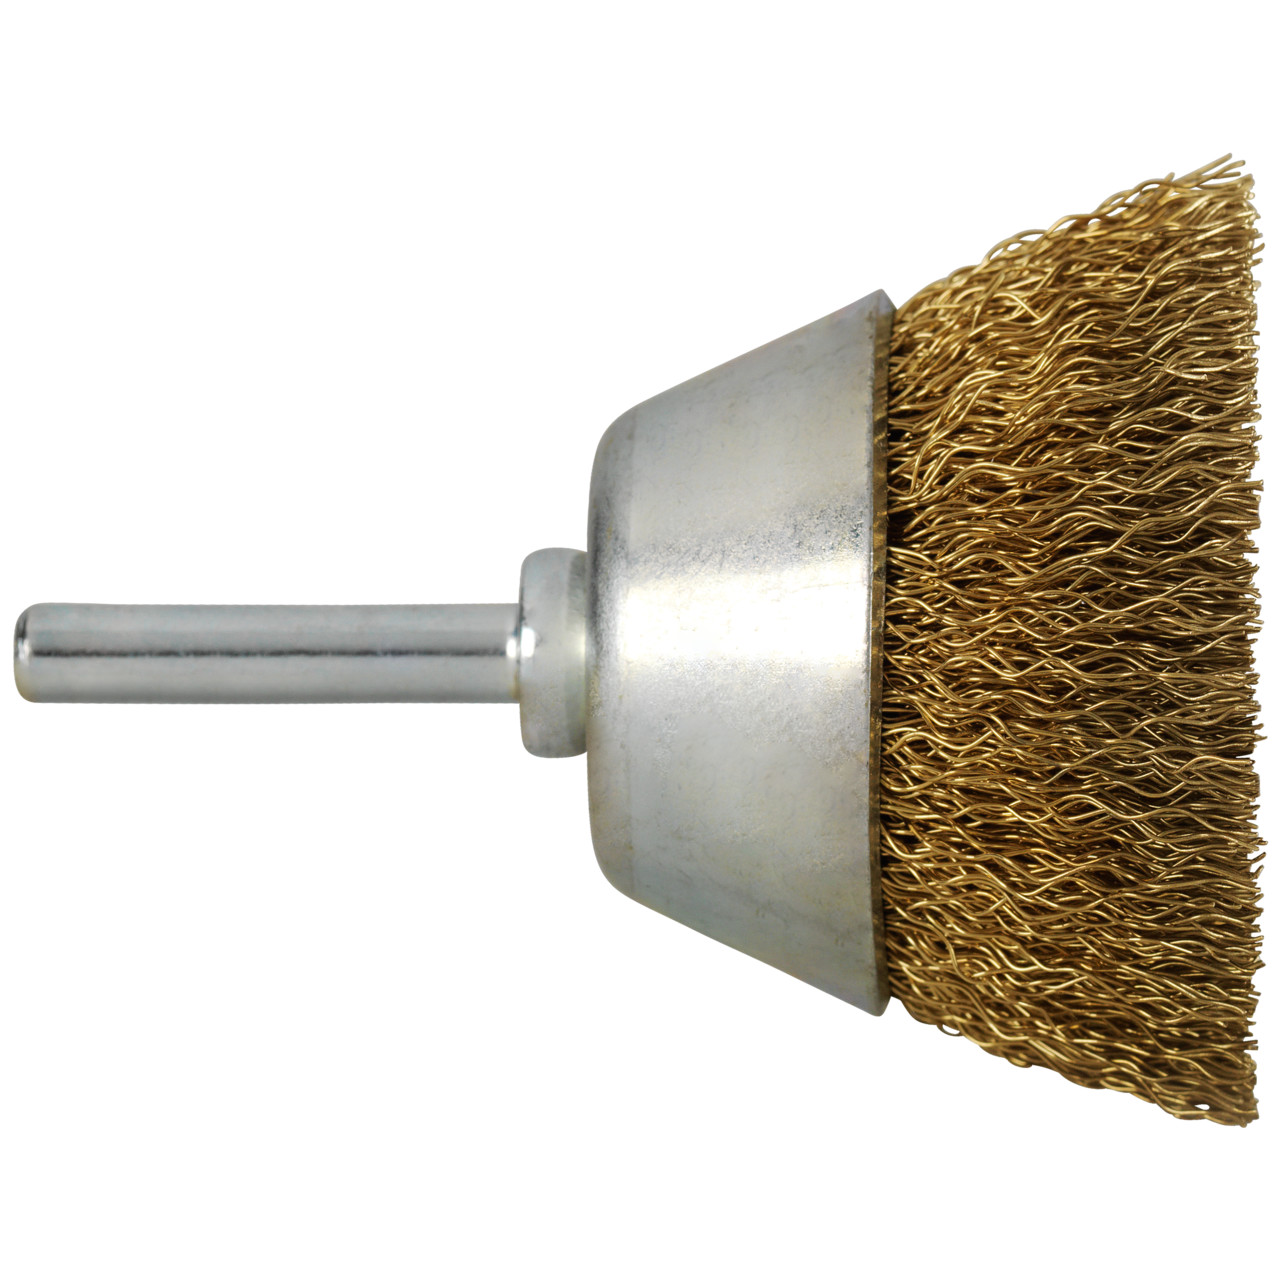 Tyrolit Cup shaft brushes DxLxH-GExI 50x10x20-6x30 For non-ferrous metals, shape: 52TDW - (cup shaft brushes), Art. 23470